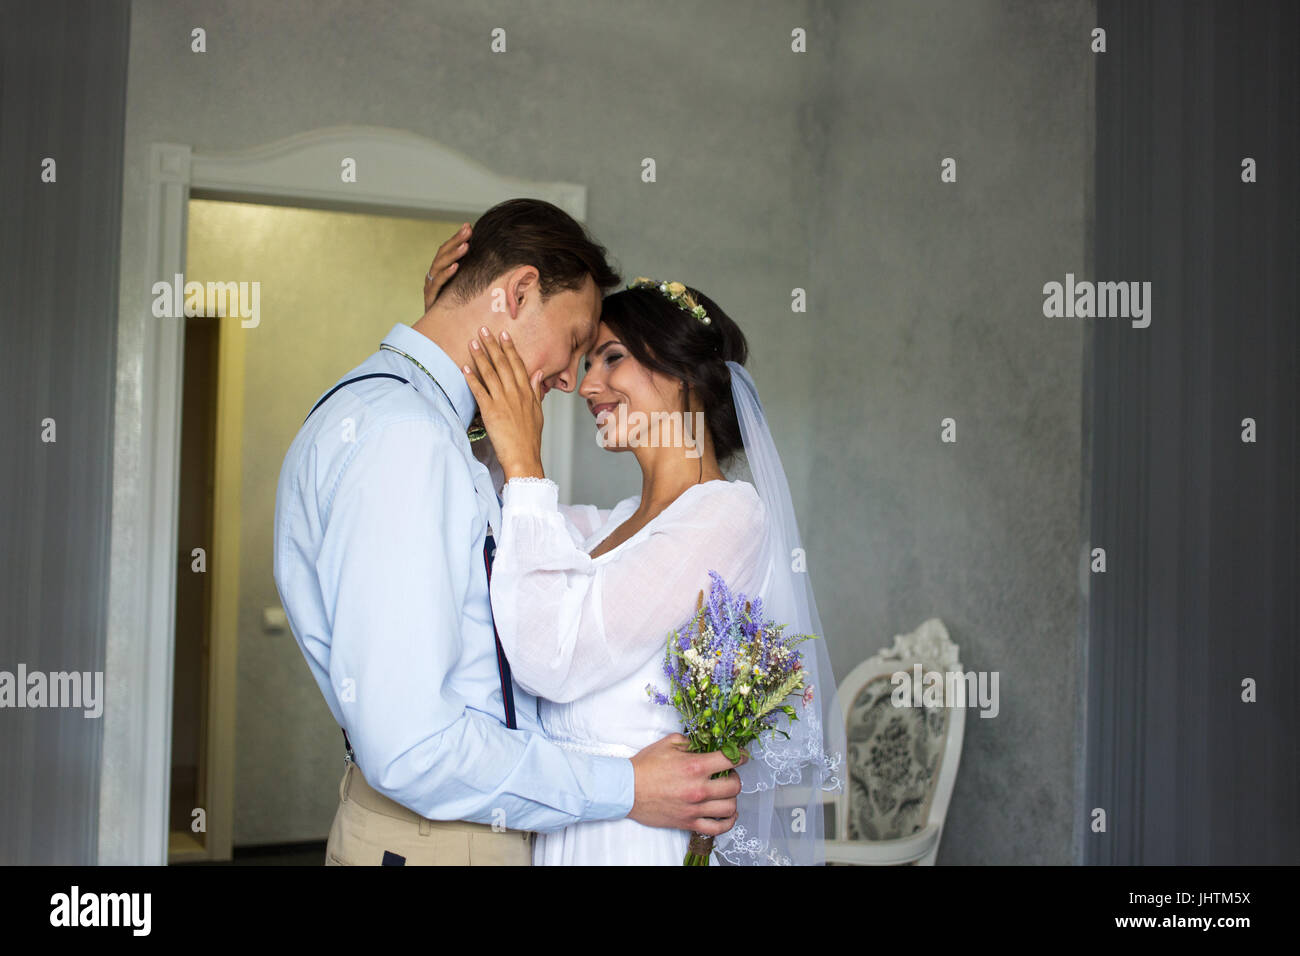 Meeting the bride and groom in the bedroom, the newlyweds are happy. Man with flowers in his hand. Love. Embrace. Stock Photo